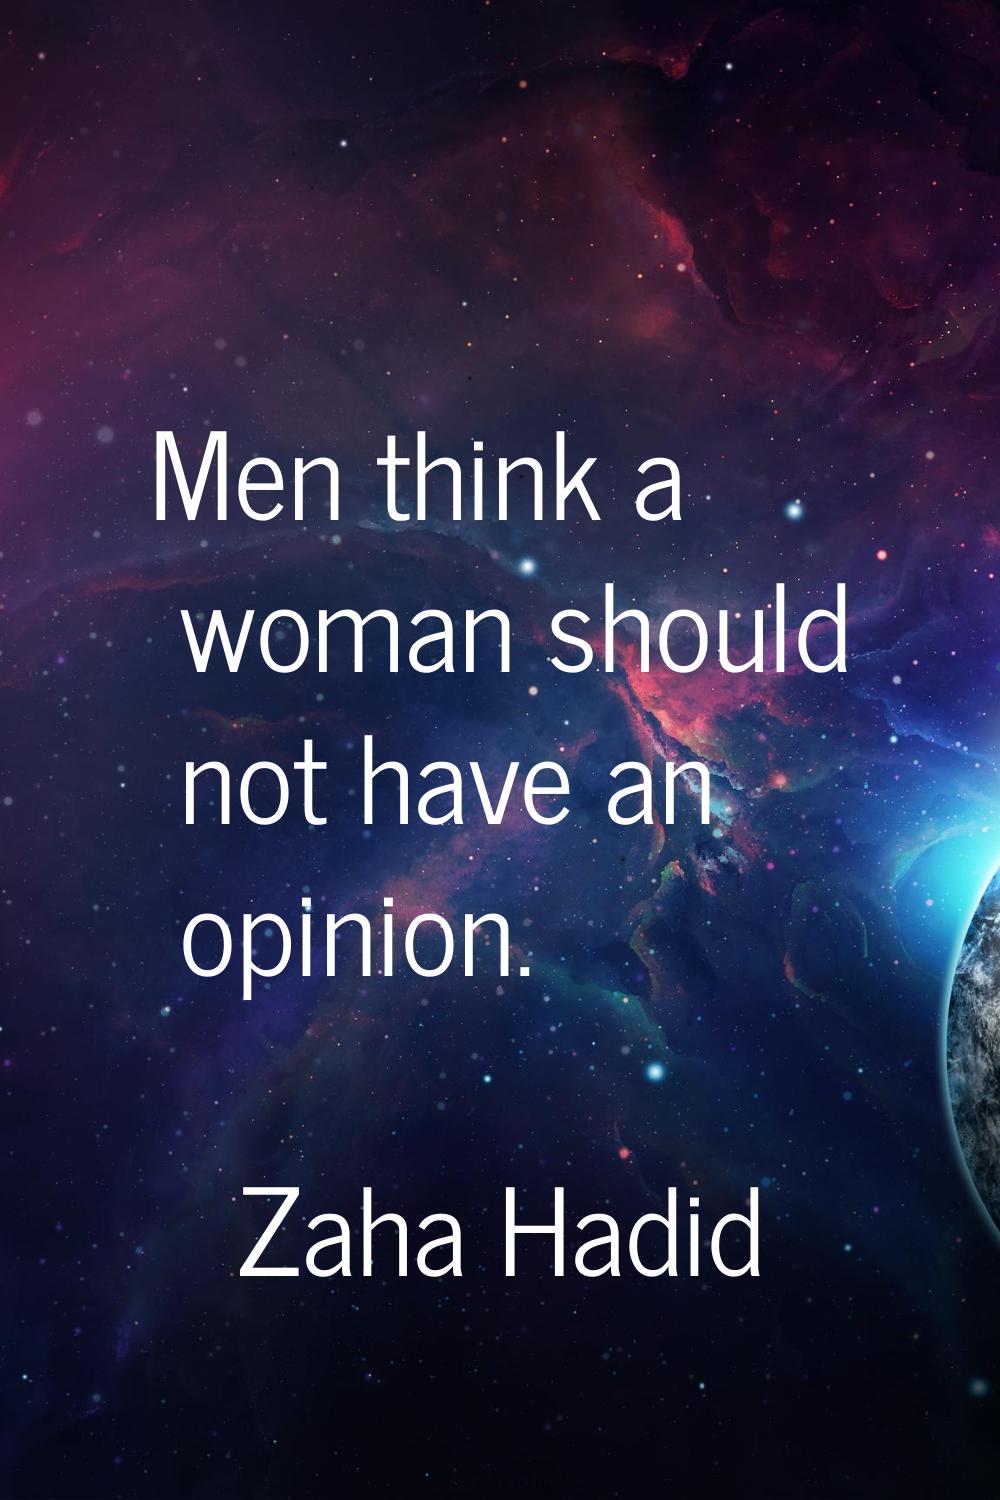 Men think a woman should not have an opinion.